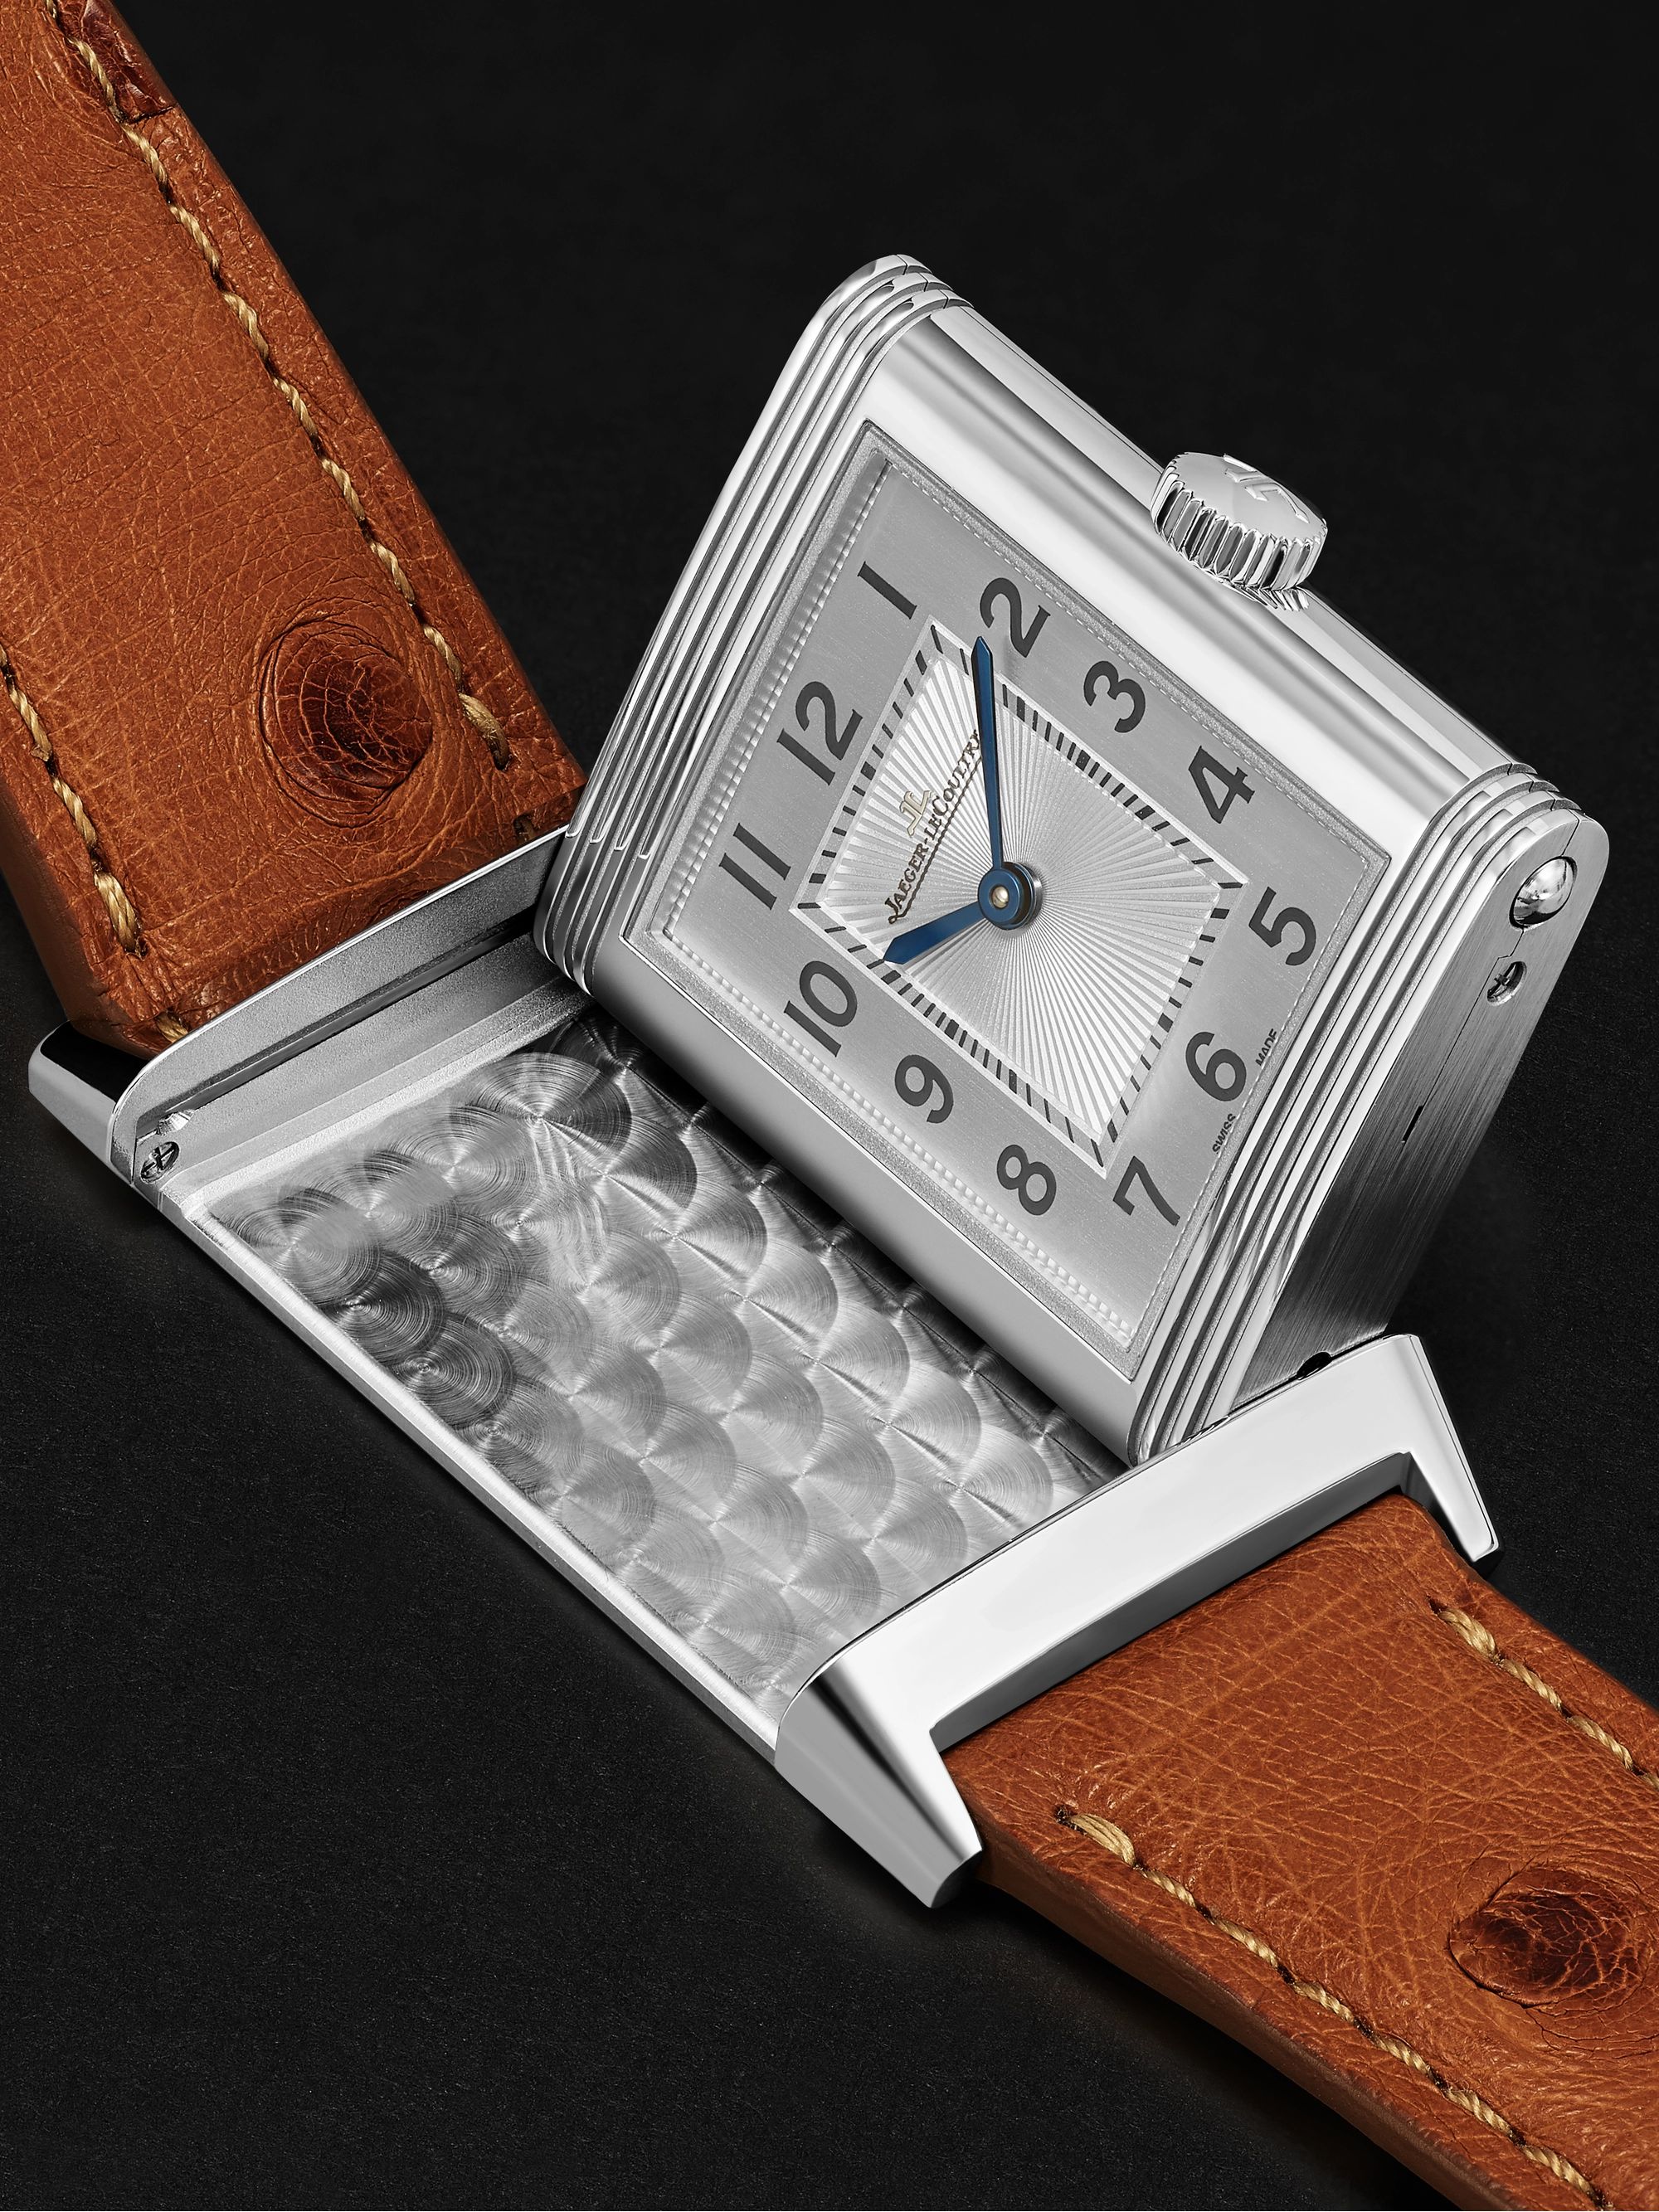 JAEGER-LECOULTRE Reverso Classic Medium Thin Hand-Wound 24.4mm Stainless Steel and Ostrich Watch, Ref. No. Q2548441